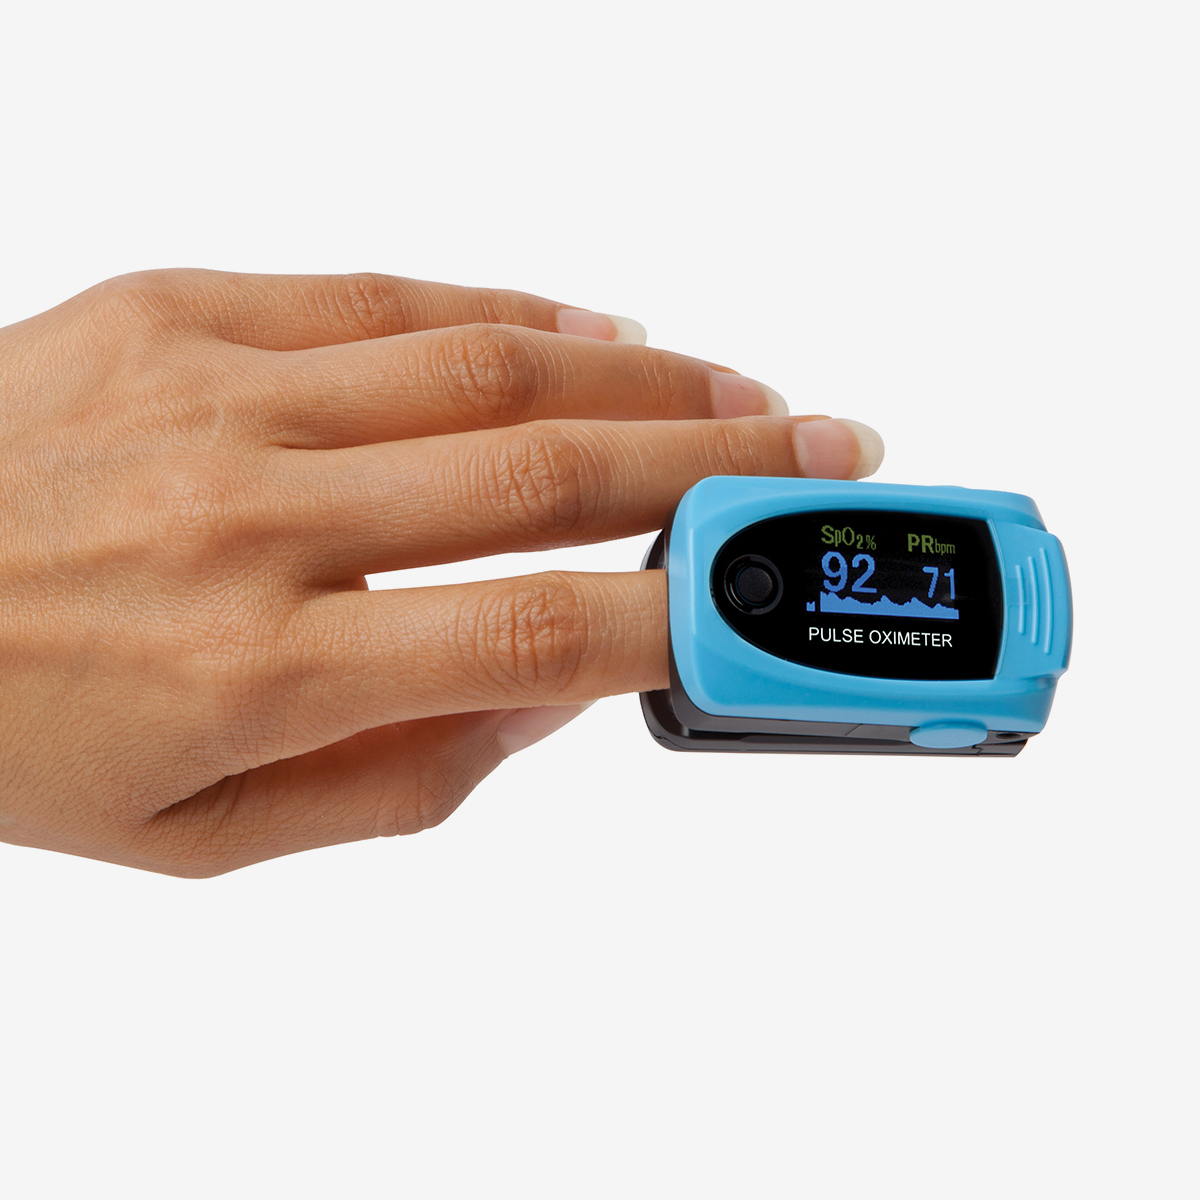 Hand using a MD300 C63 pulse oximeter on white background